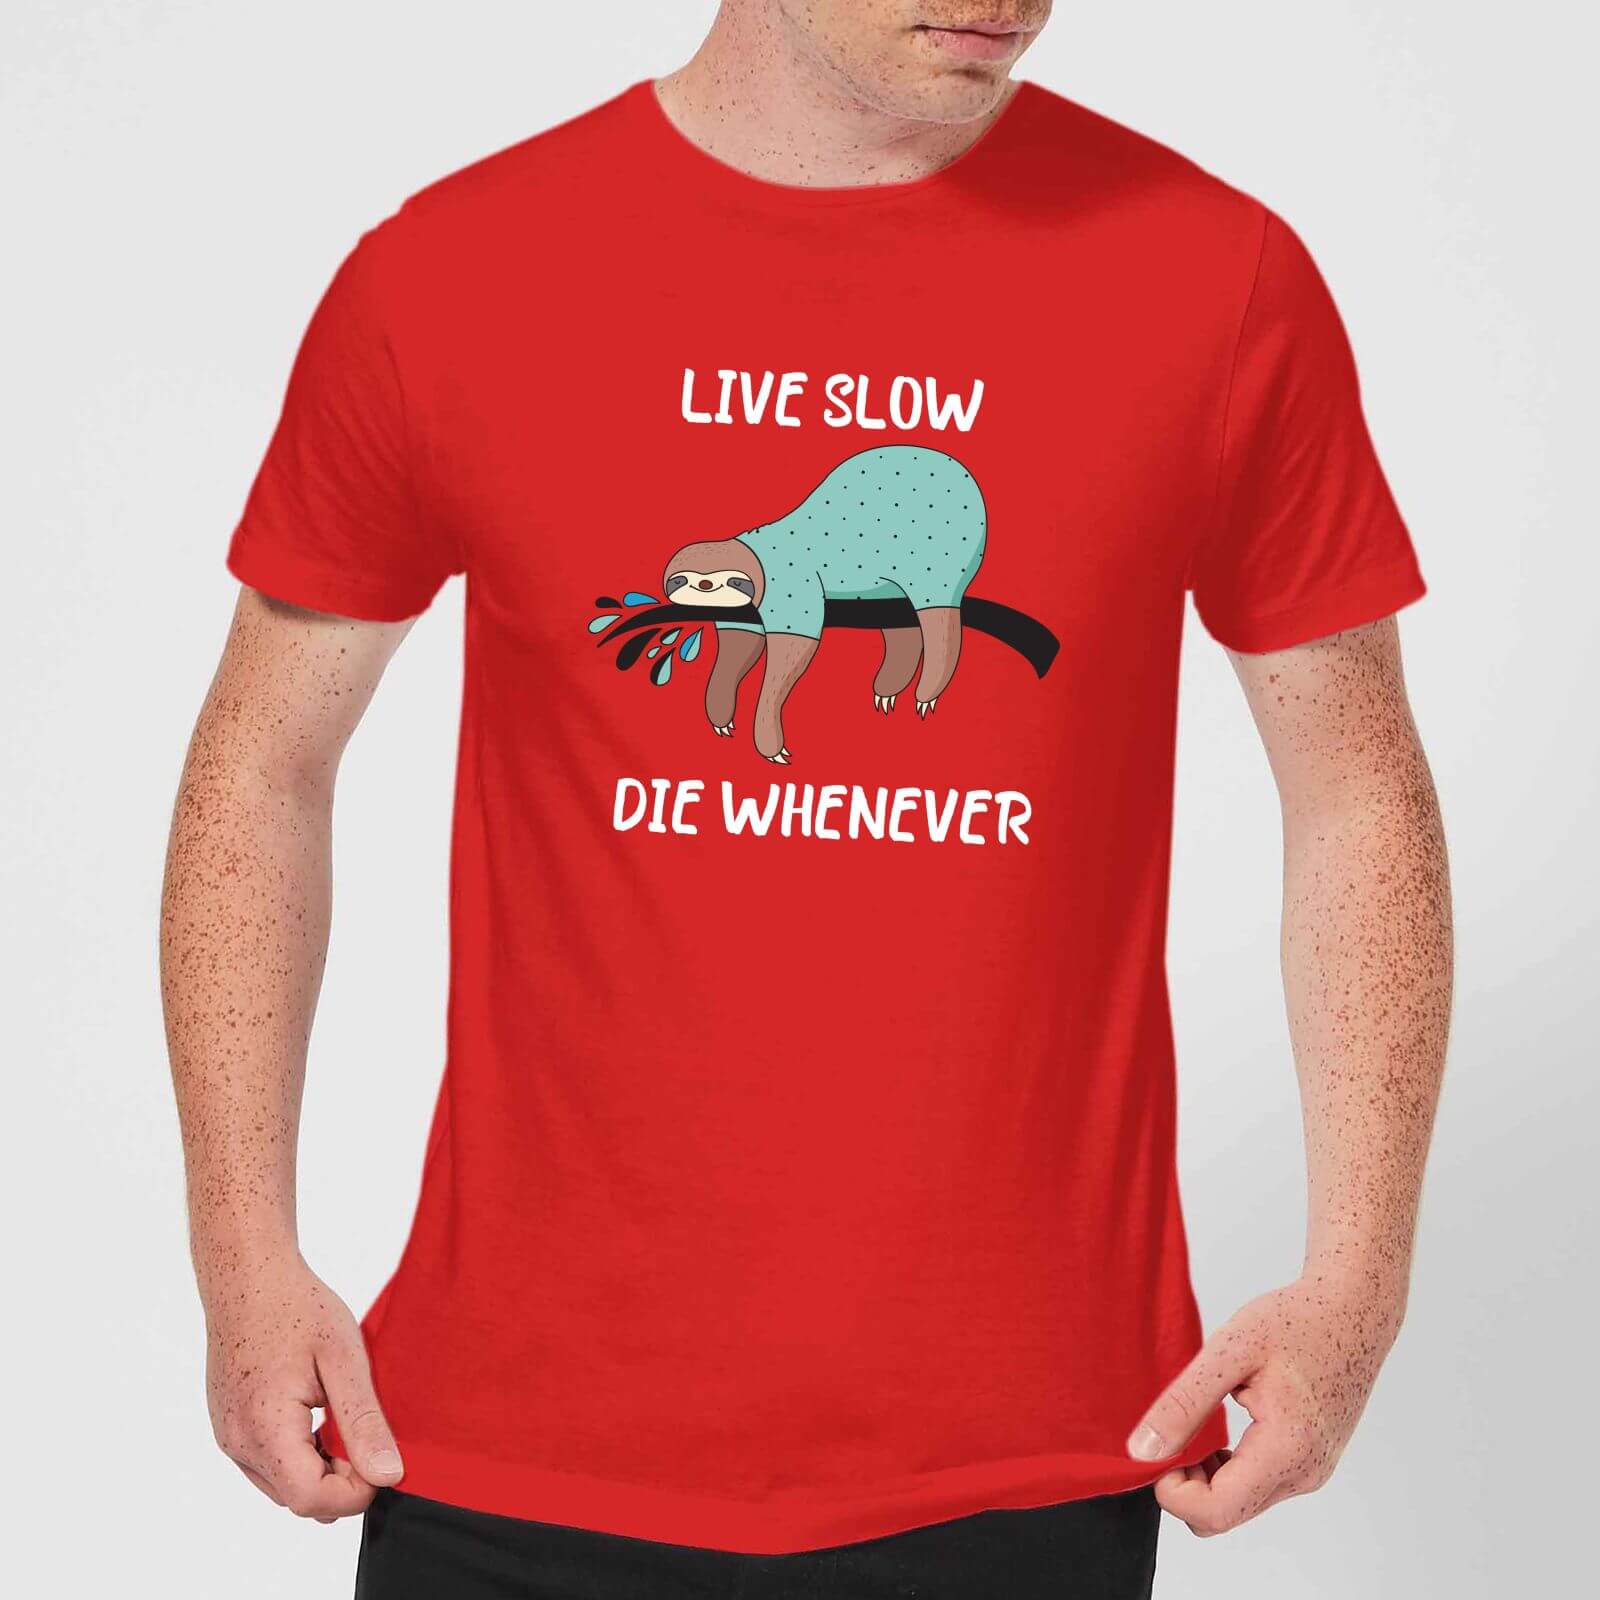 Live Slow Die WHenever T-Shirt - Red - XL - Red